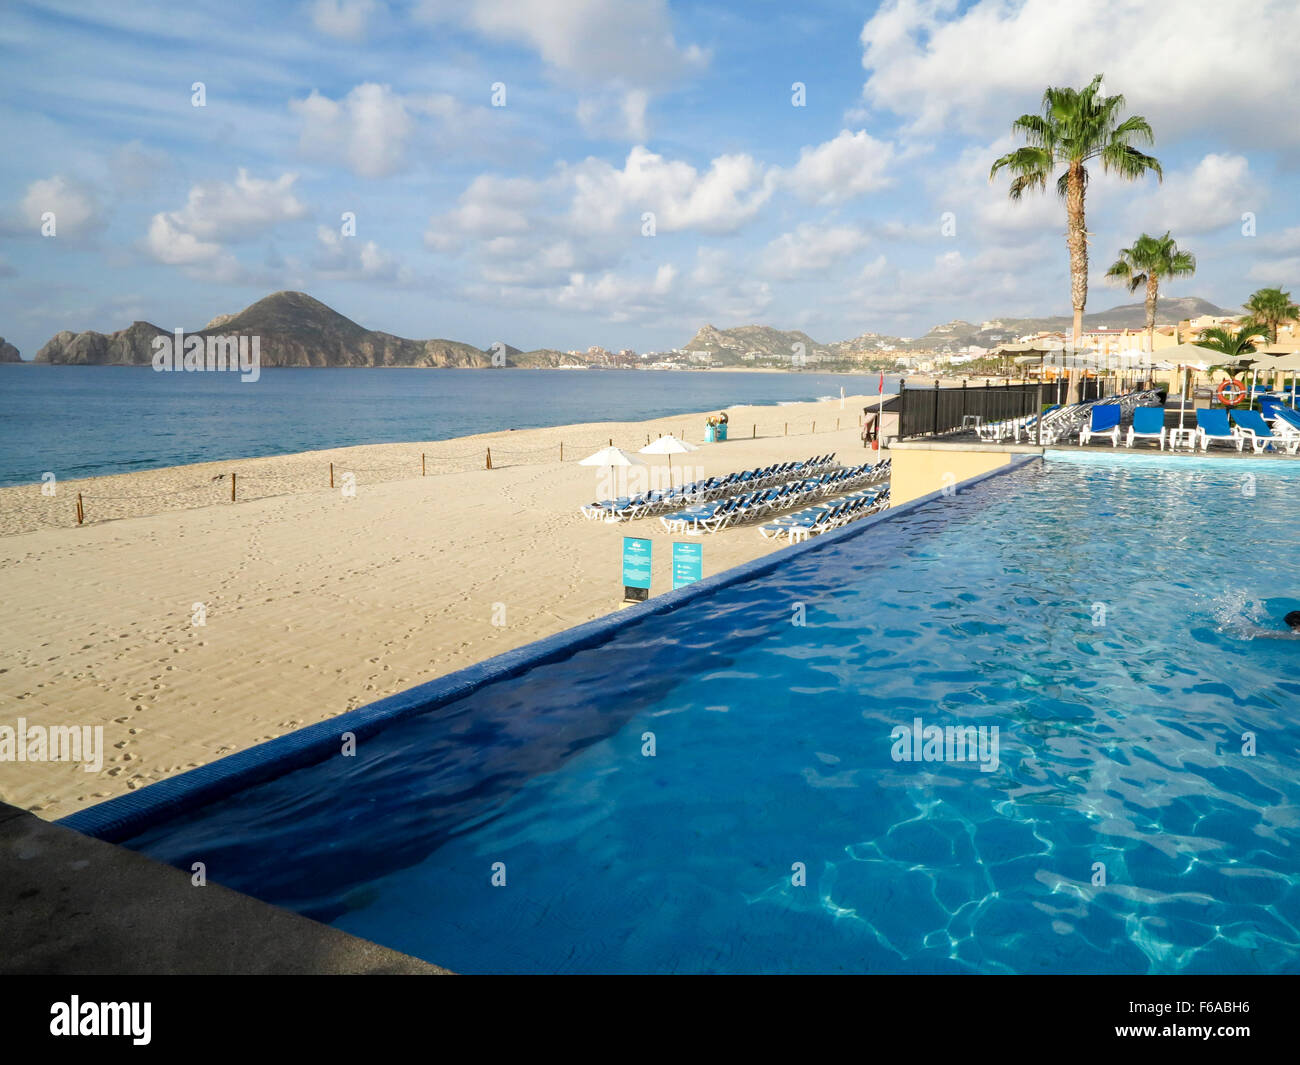 CABO SAN LUCAS, MEXICO - AUGUST 8, 2014: Unidentified people at RIU Santa Fe Hotel at Cabo San Lucas, Mexico. It is a 5 star hot Stock Photo